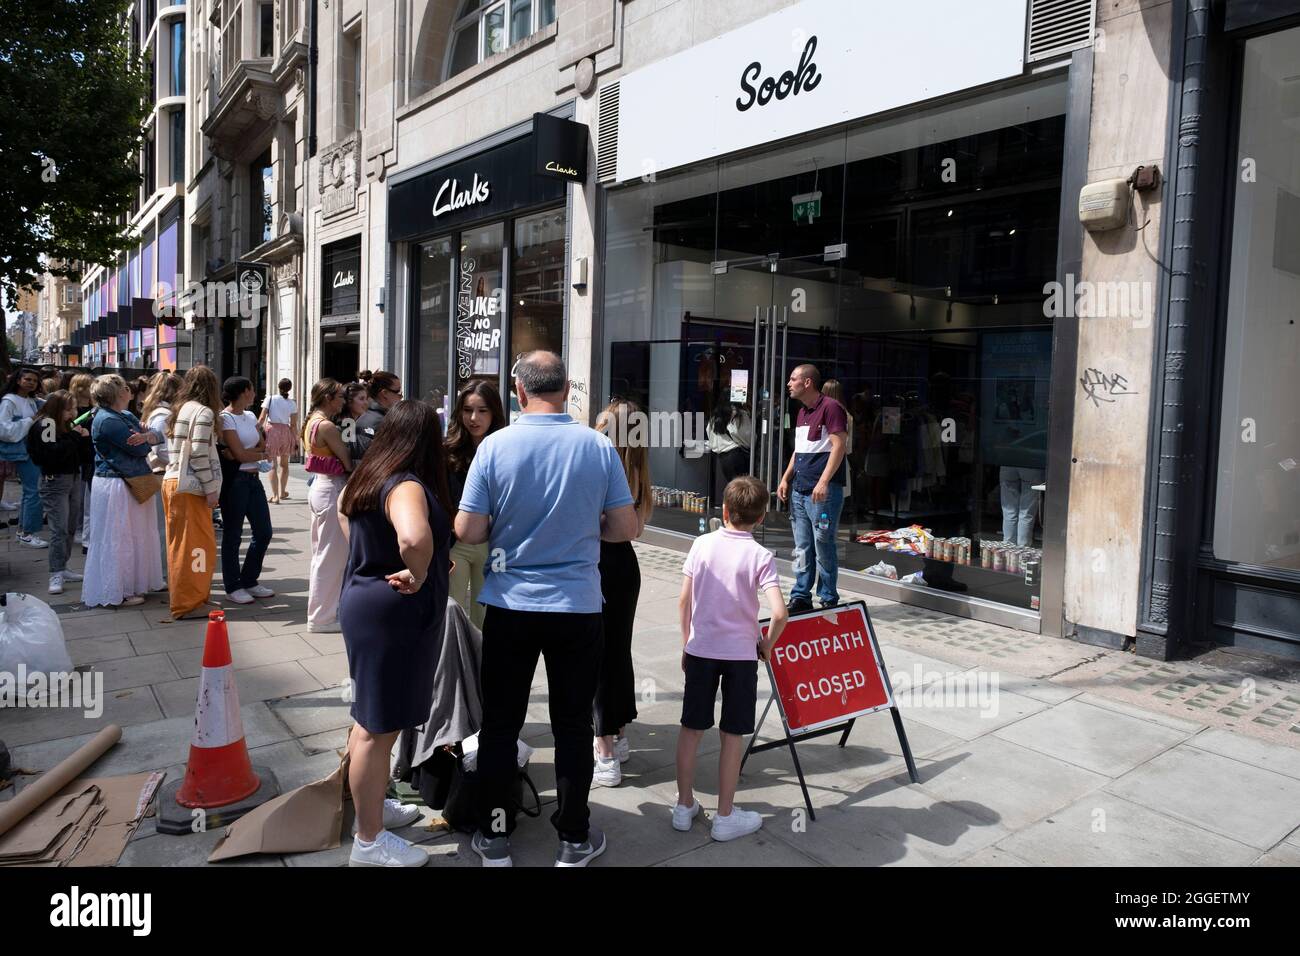 Now that most restrictions have come to an end, Oxford Street shopping  district is busier than much of the last 18 months as shoppers return in  their droves and retail business looks